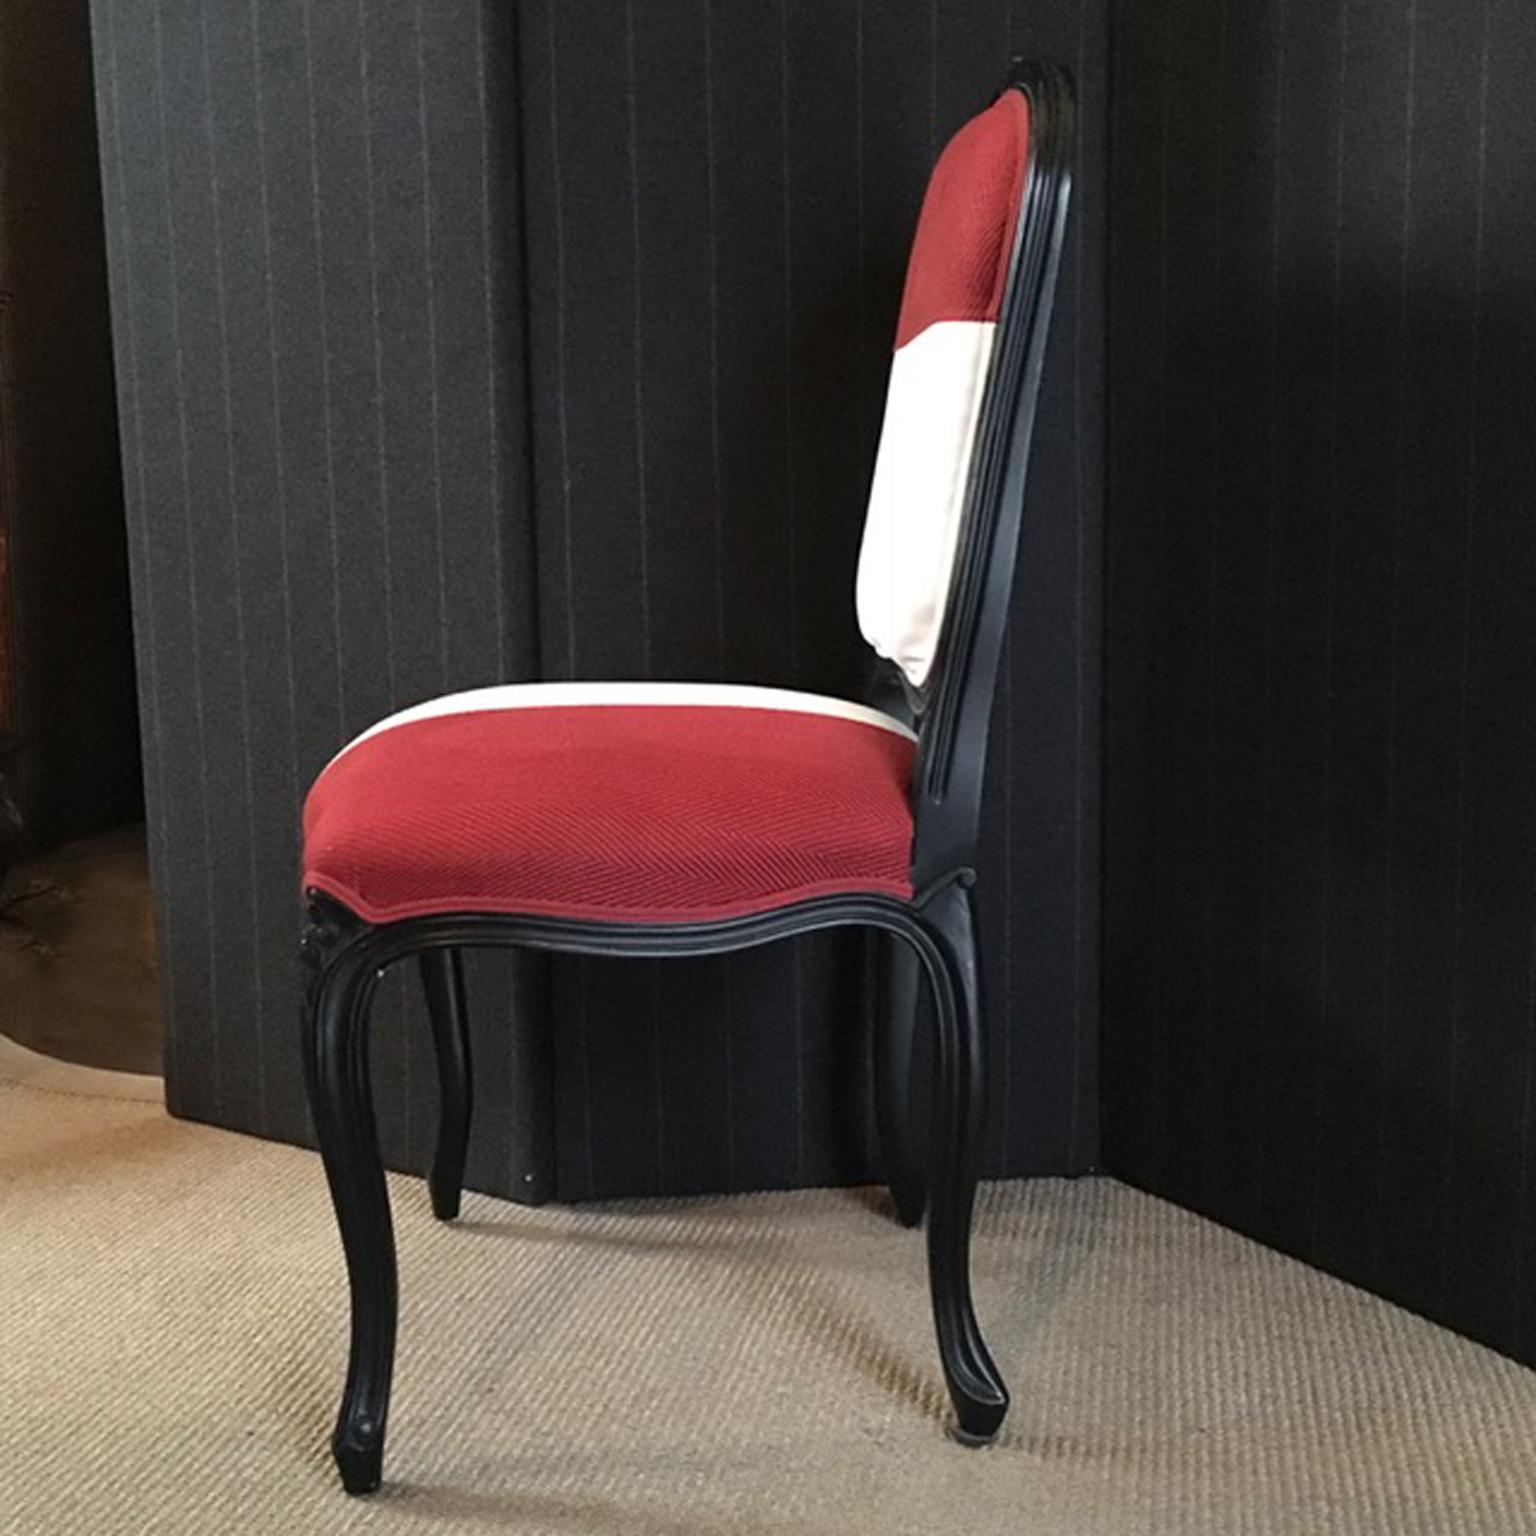 Contemporary French Provincial Lacquered Black Wood Dining Chair Upholstered Red and White For Sale